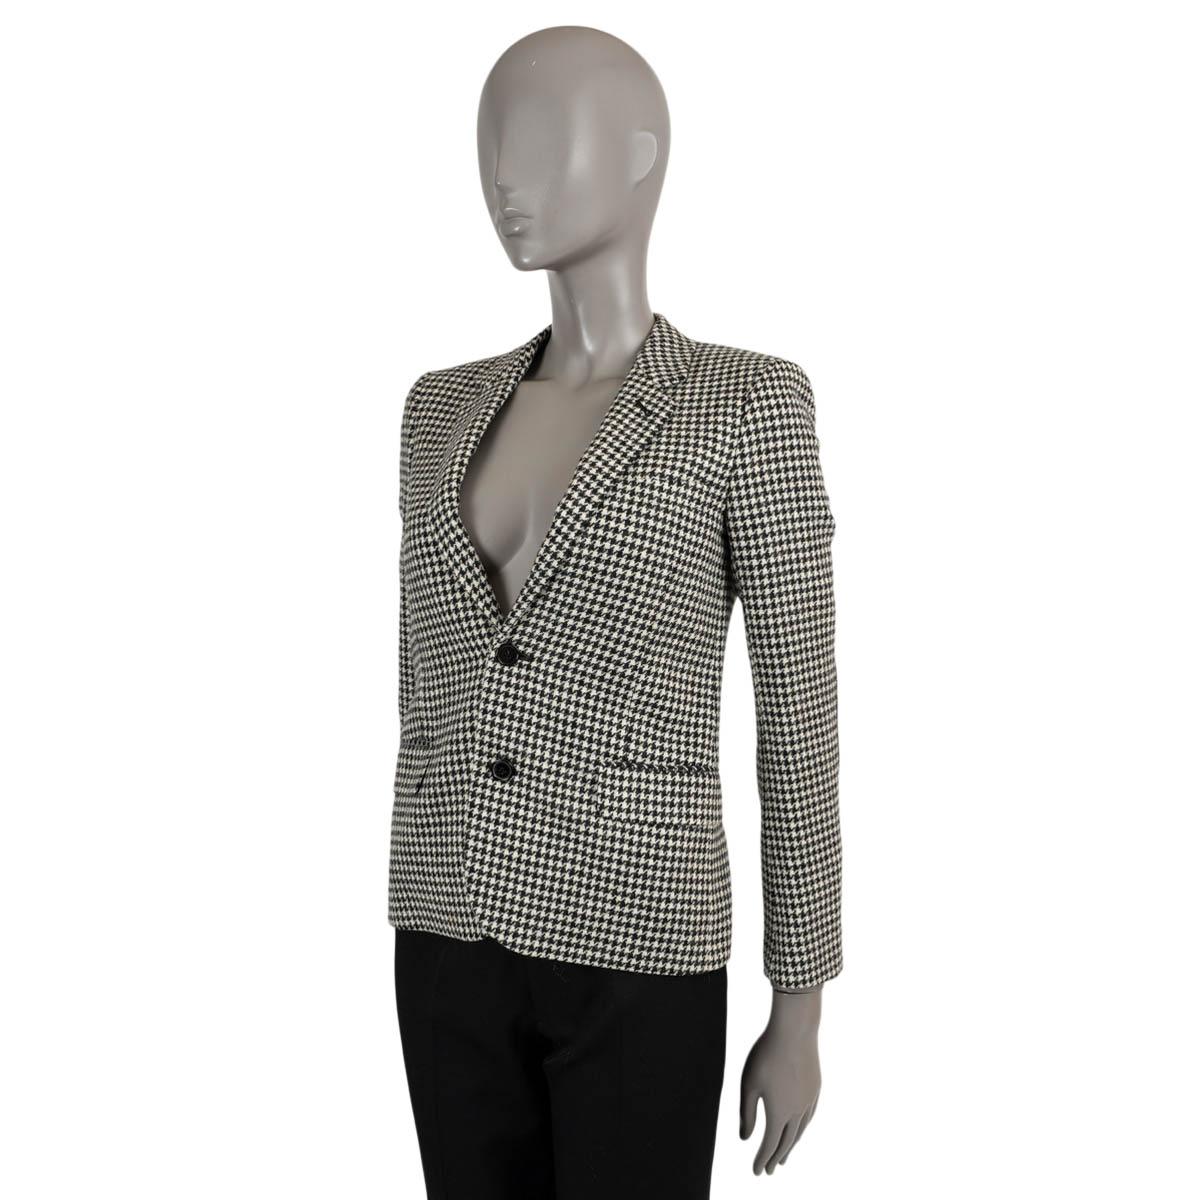 100% authentic Saint Laurent houndstooth blazer in black and white wool (100%). Features two flap and chest pockets, buttoned sleeves and black elbow patches. Closes with two buttons and is lined in silk (100%). Has been worn and is in excellent